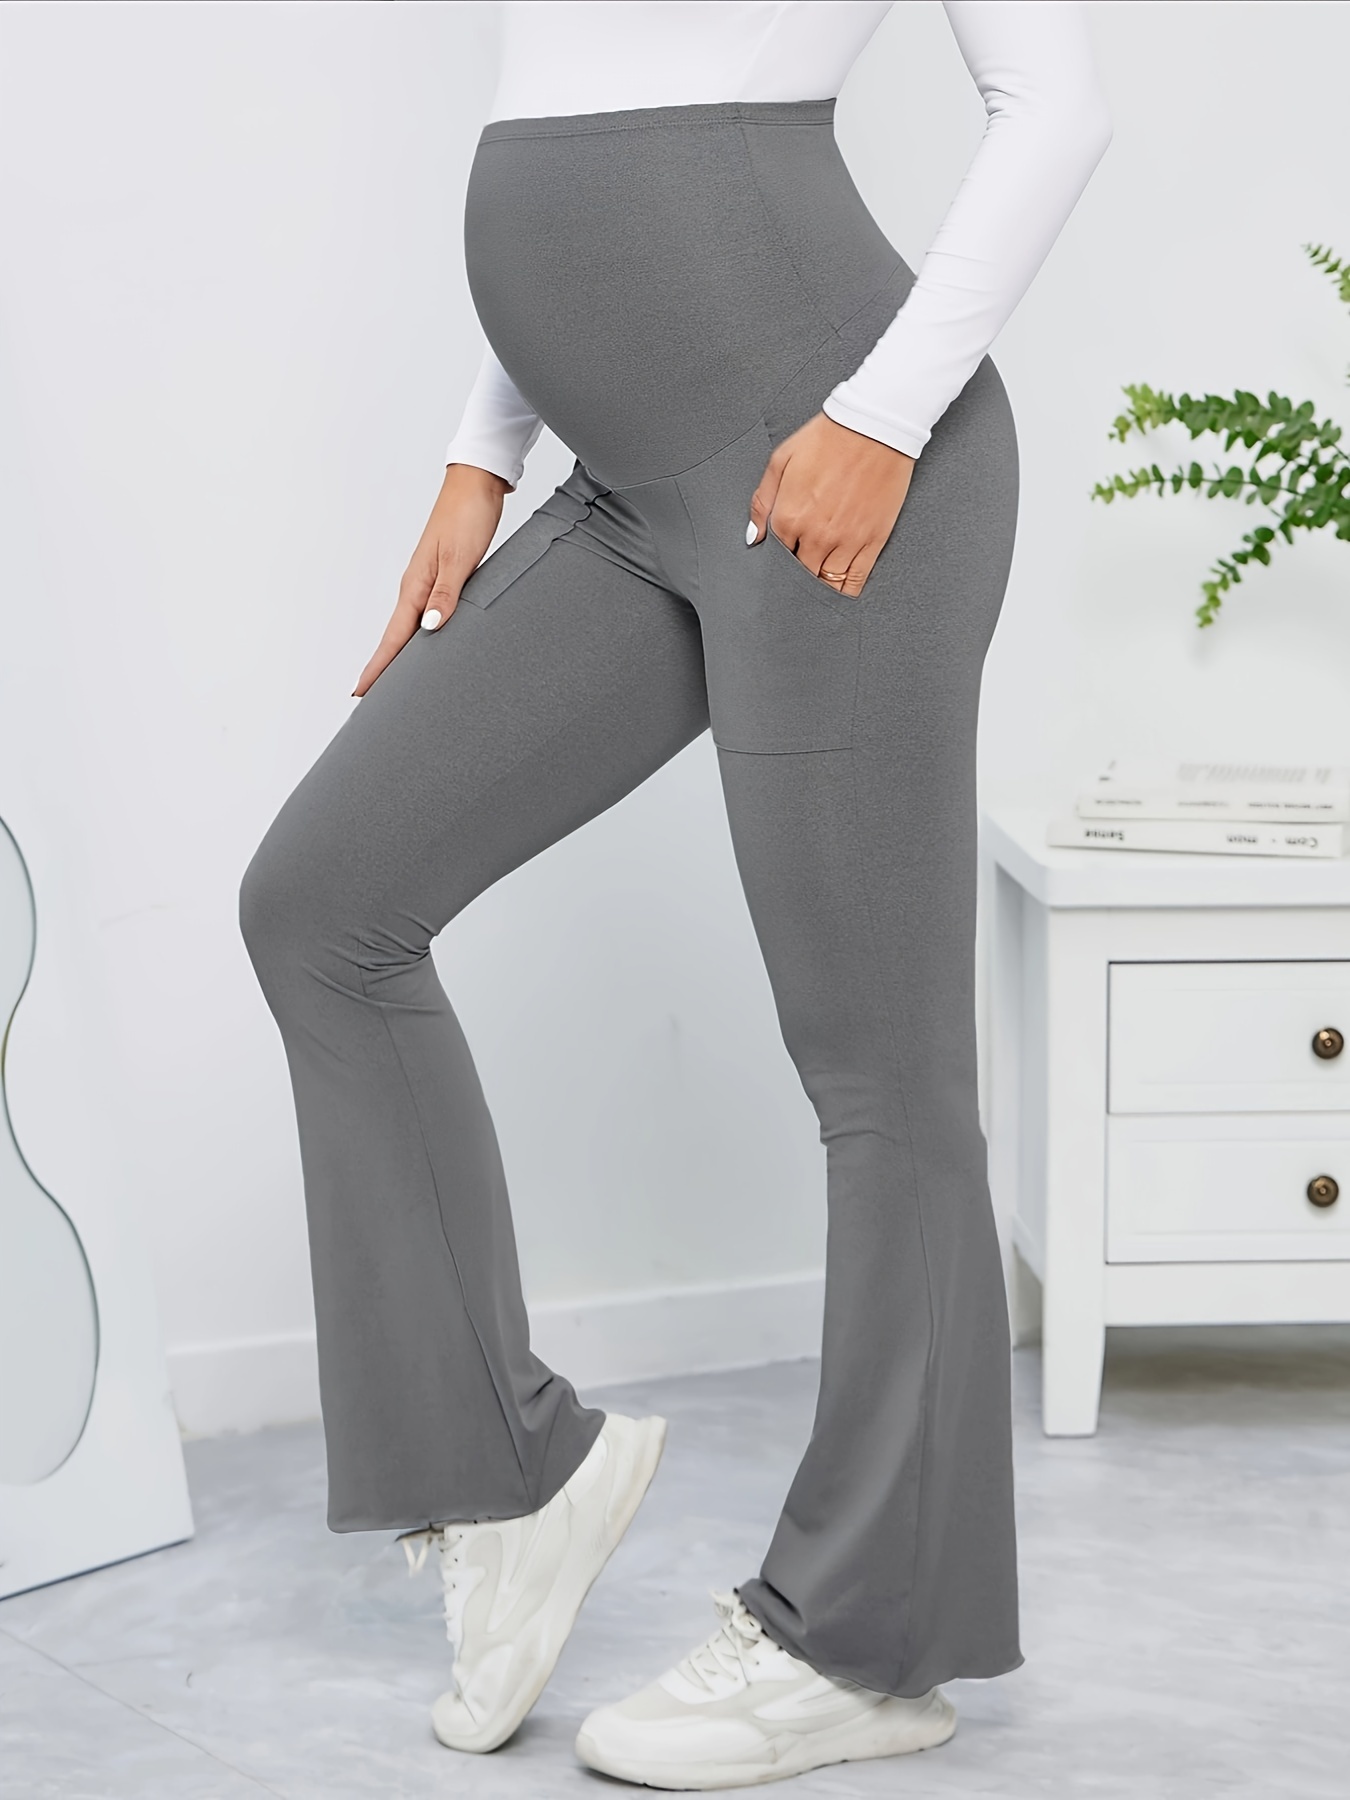 Women's Maternity Solid Skinny Flared Pants, Pregnant Women's